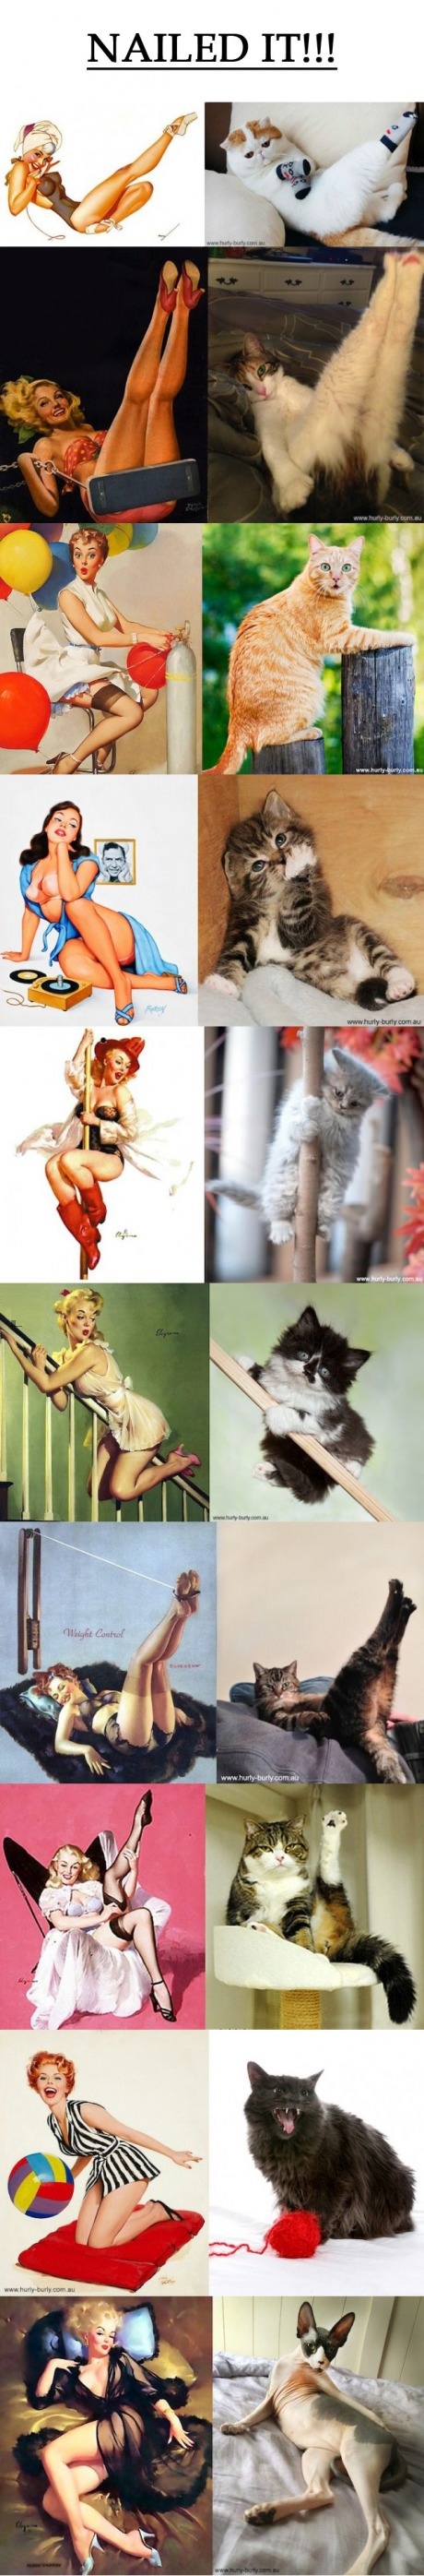 funny-picture-pin-up-girls-cat